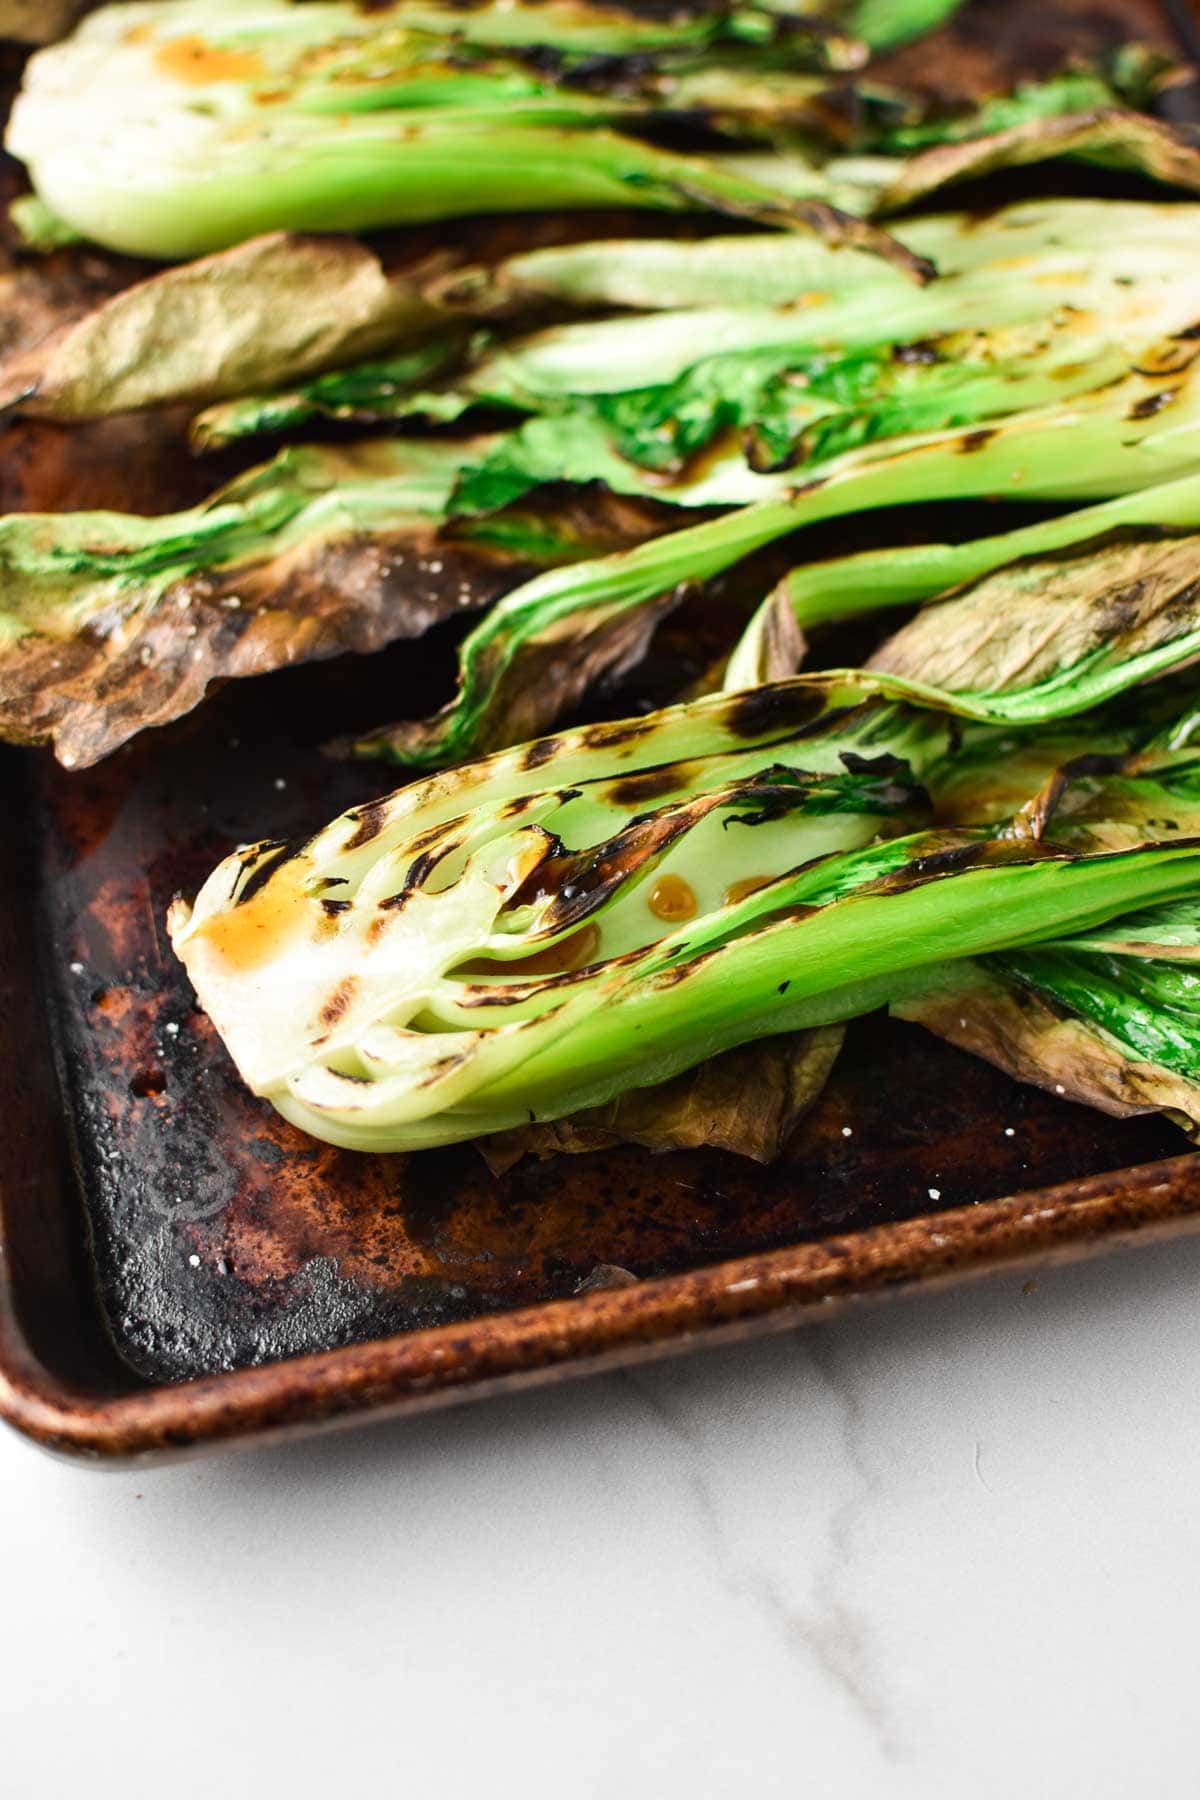 Bok choy with grill marks covered in sweet chili sauce.